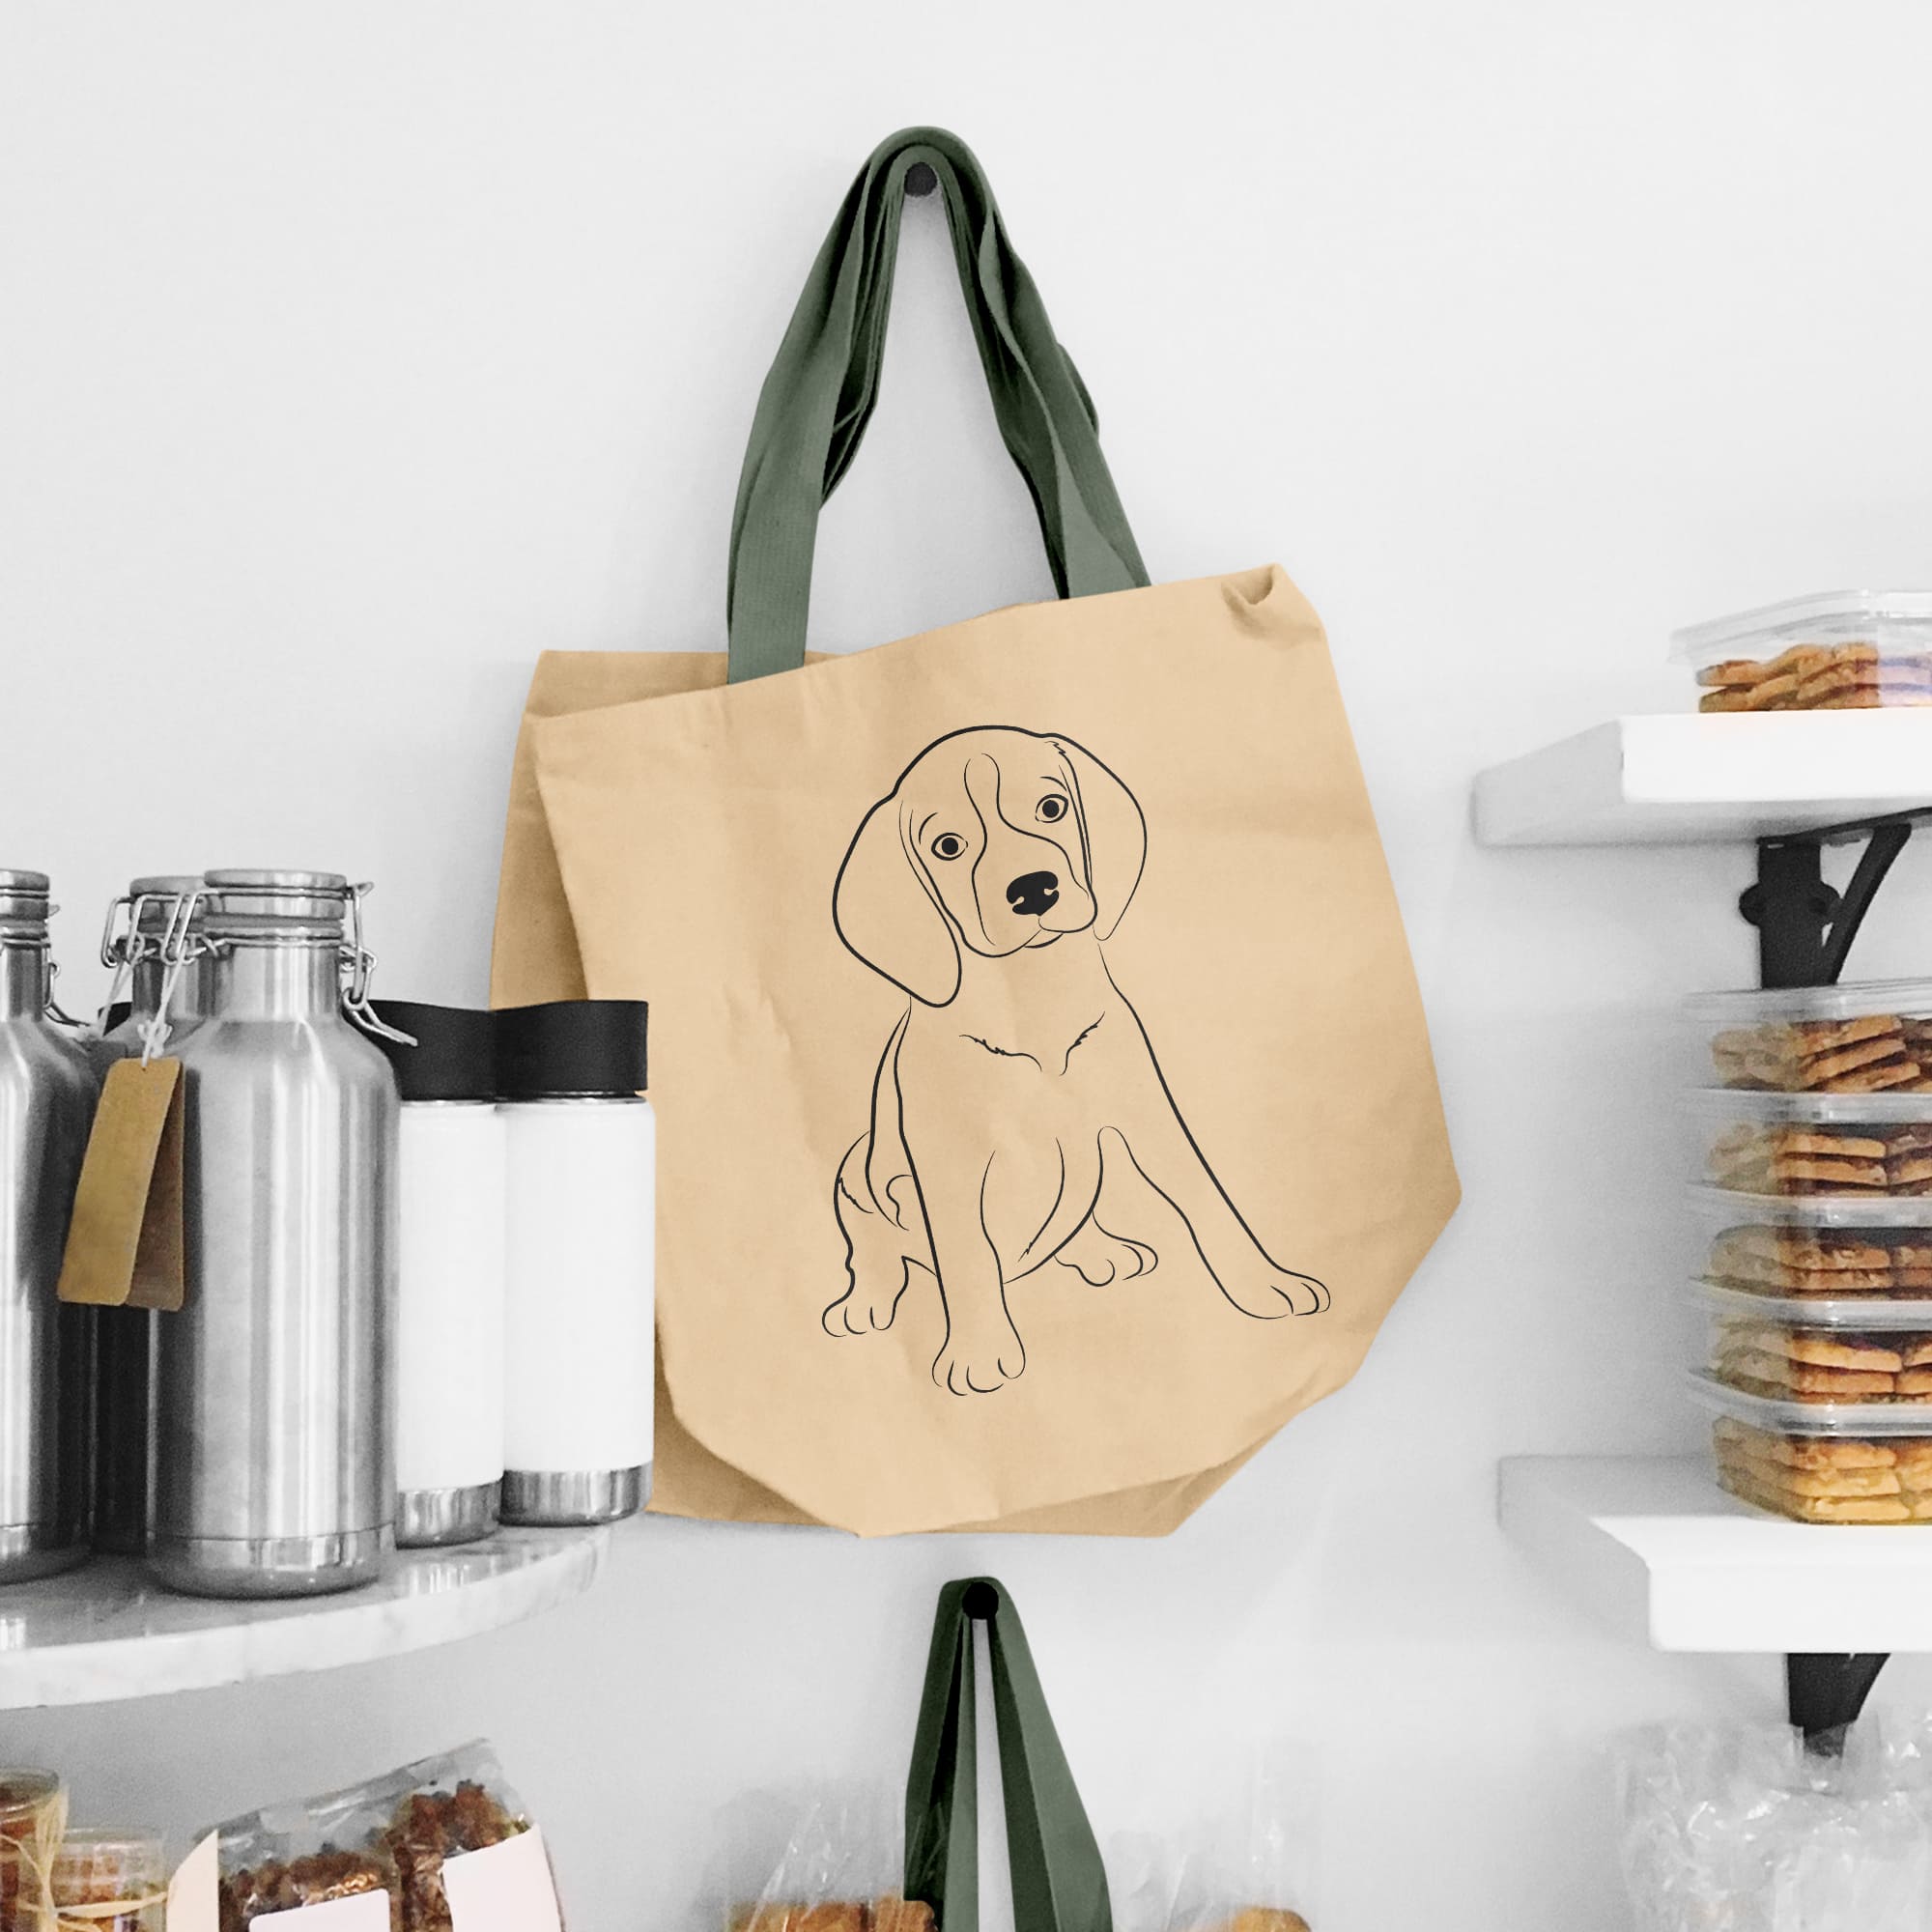 Brown paper bag with a dog drawn on it.